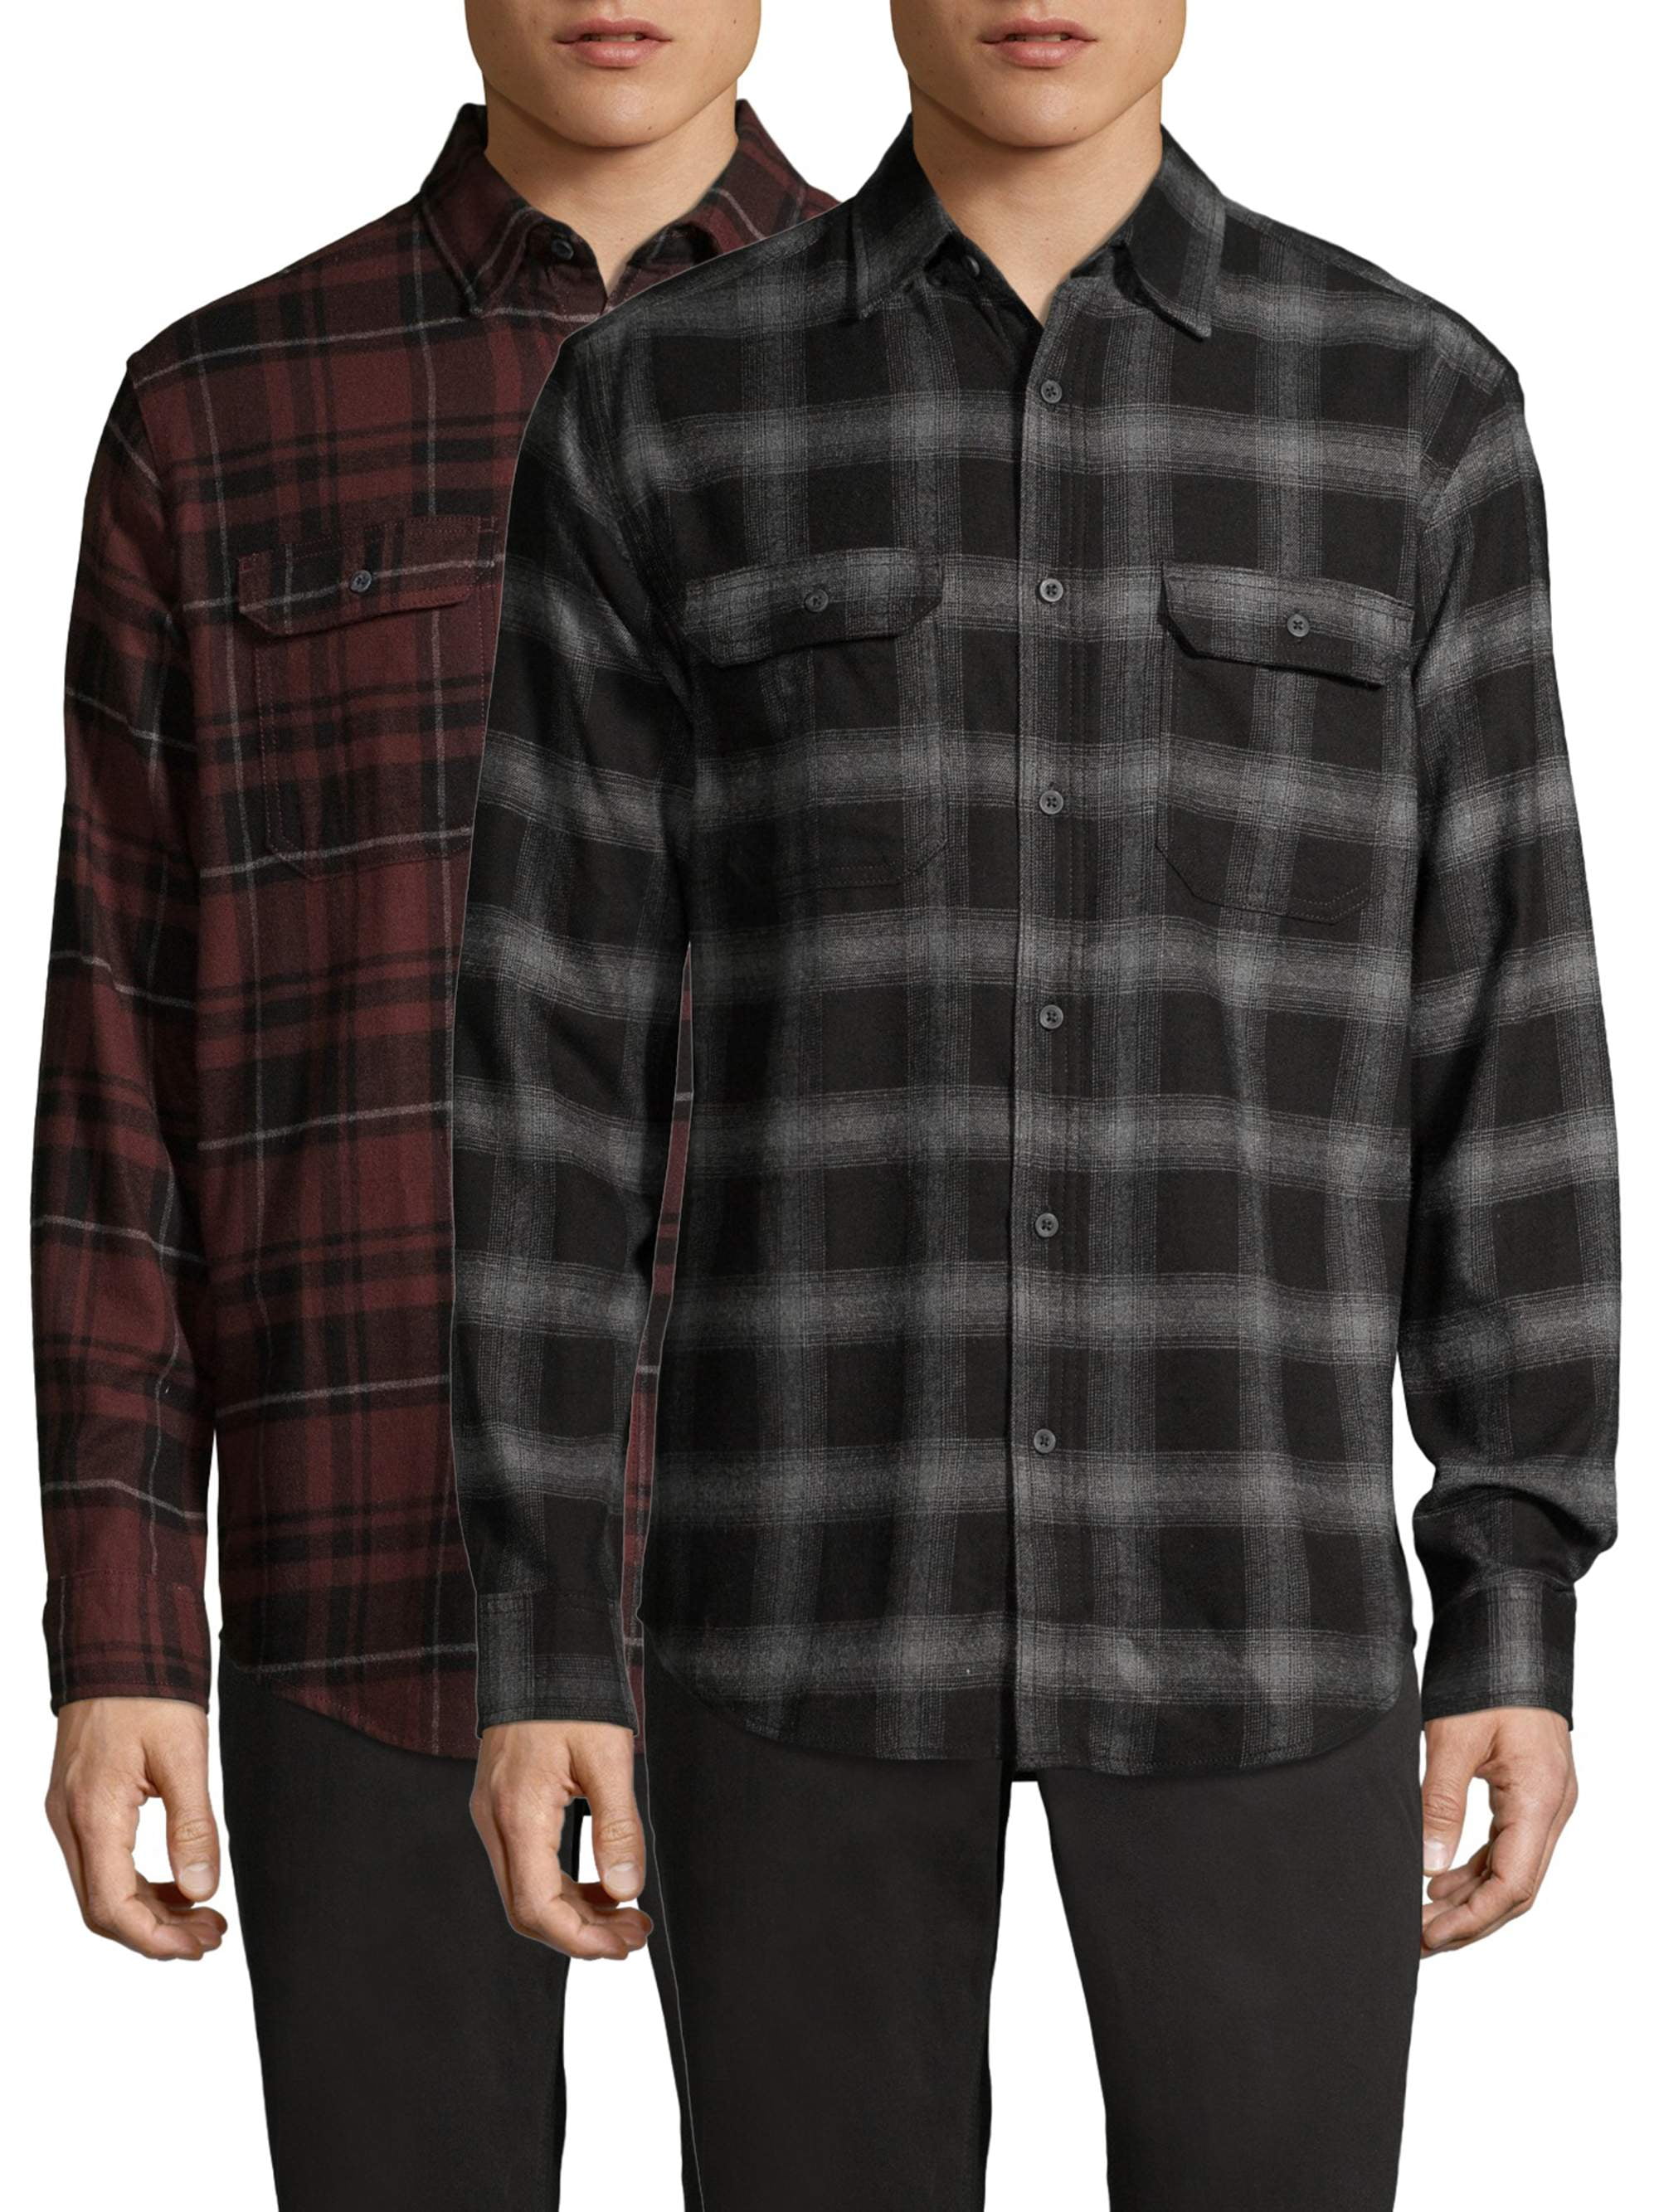 Buy > 5xl flannel shirts > in stock